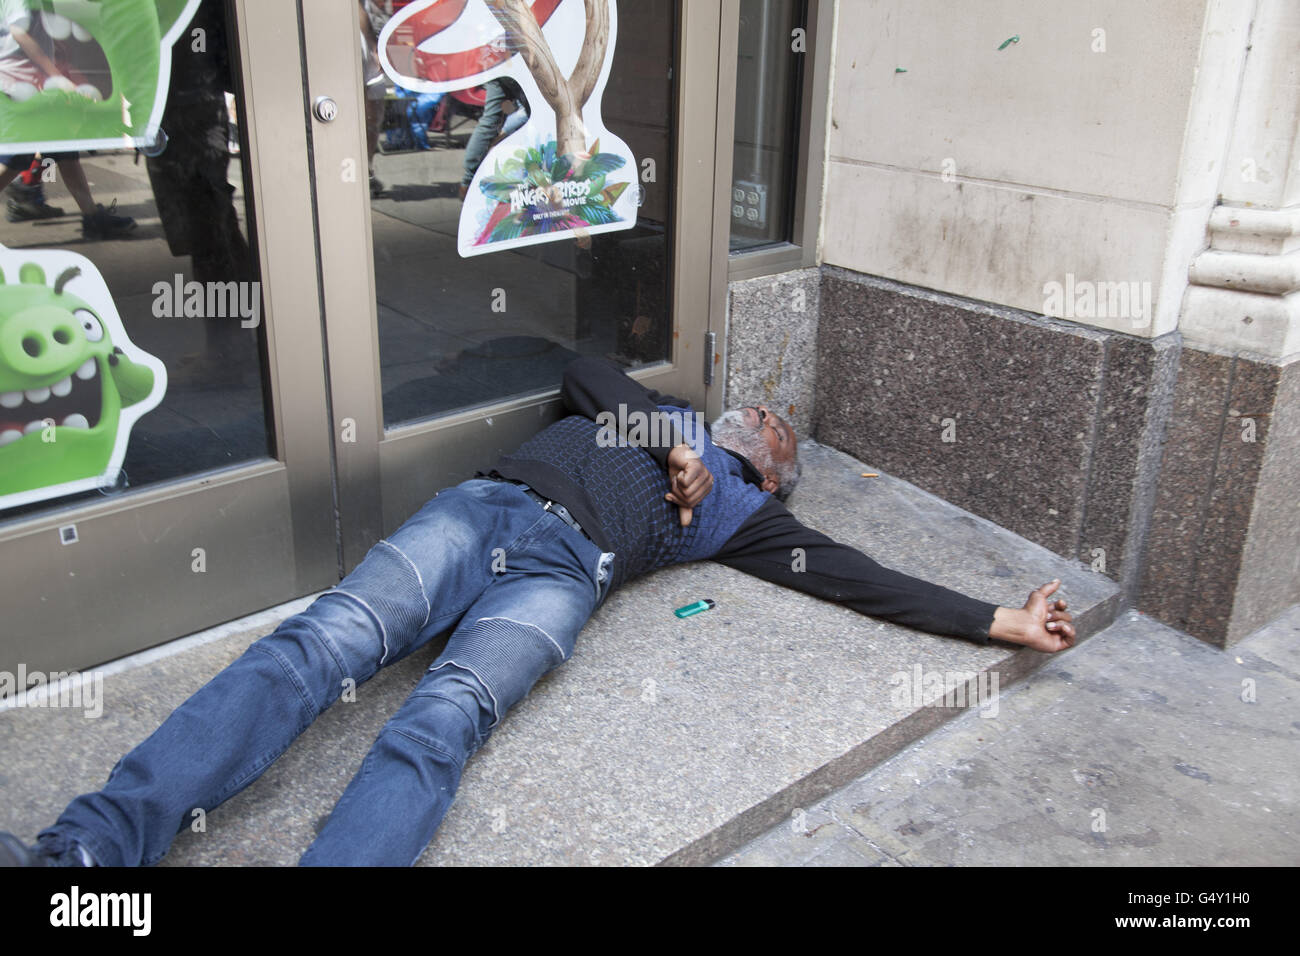 Man passed out on the sidewalk in midtown Manhattan from too much alcohol. Stock Photo